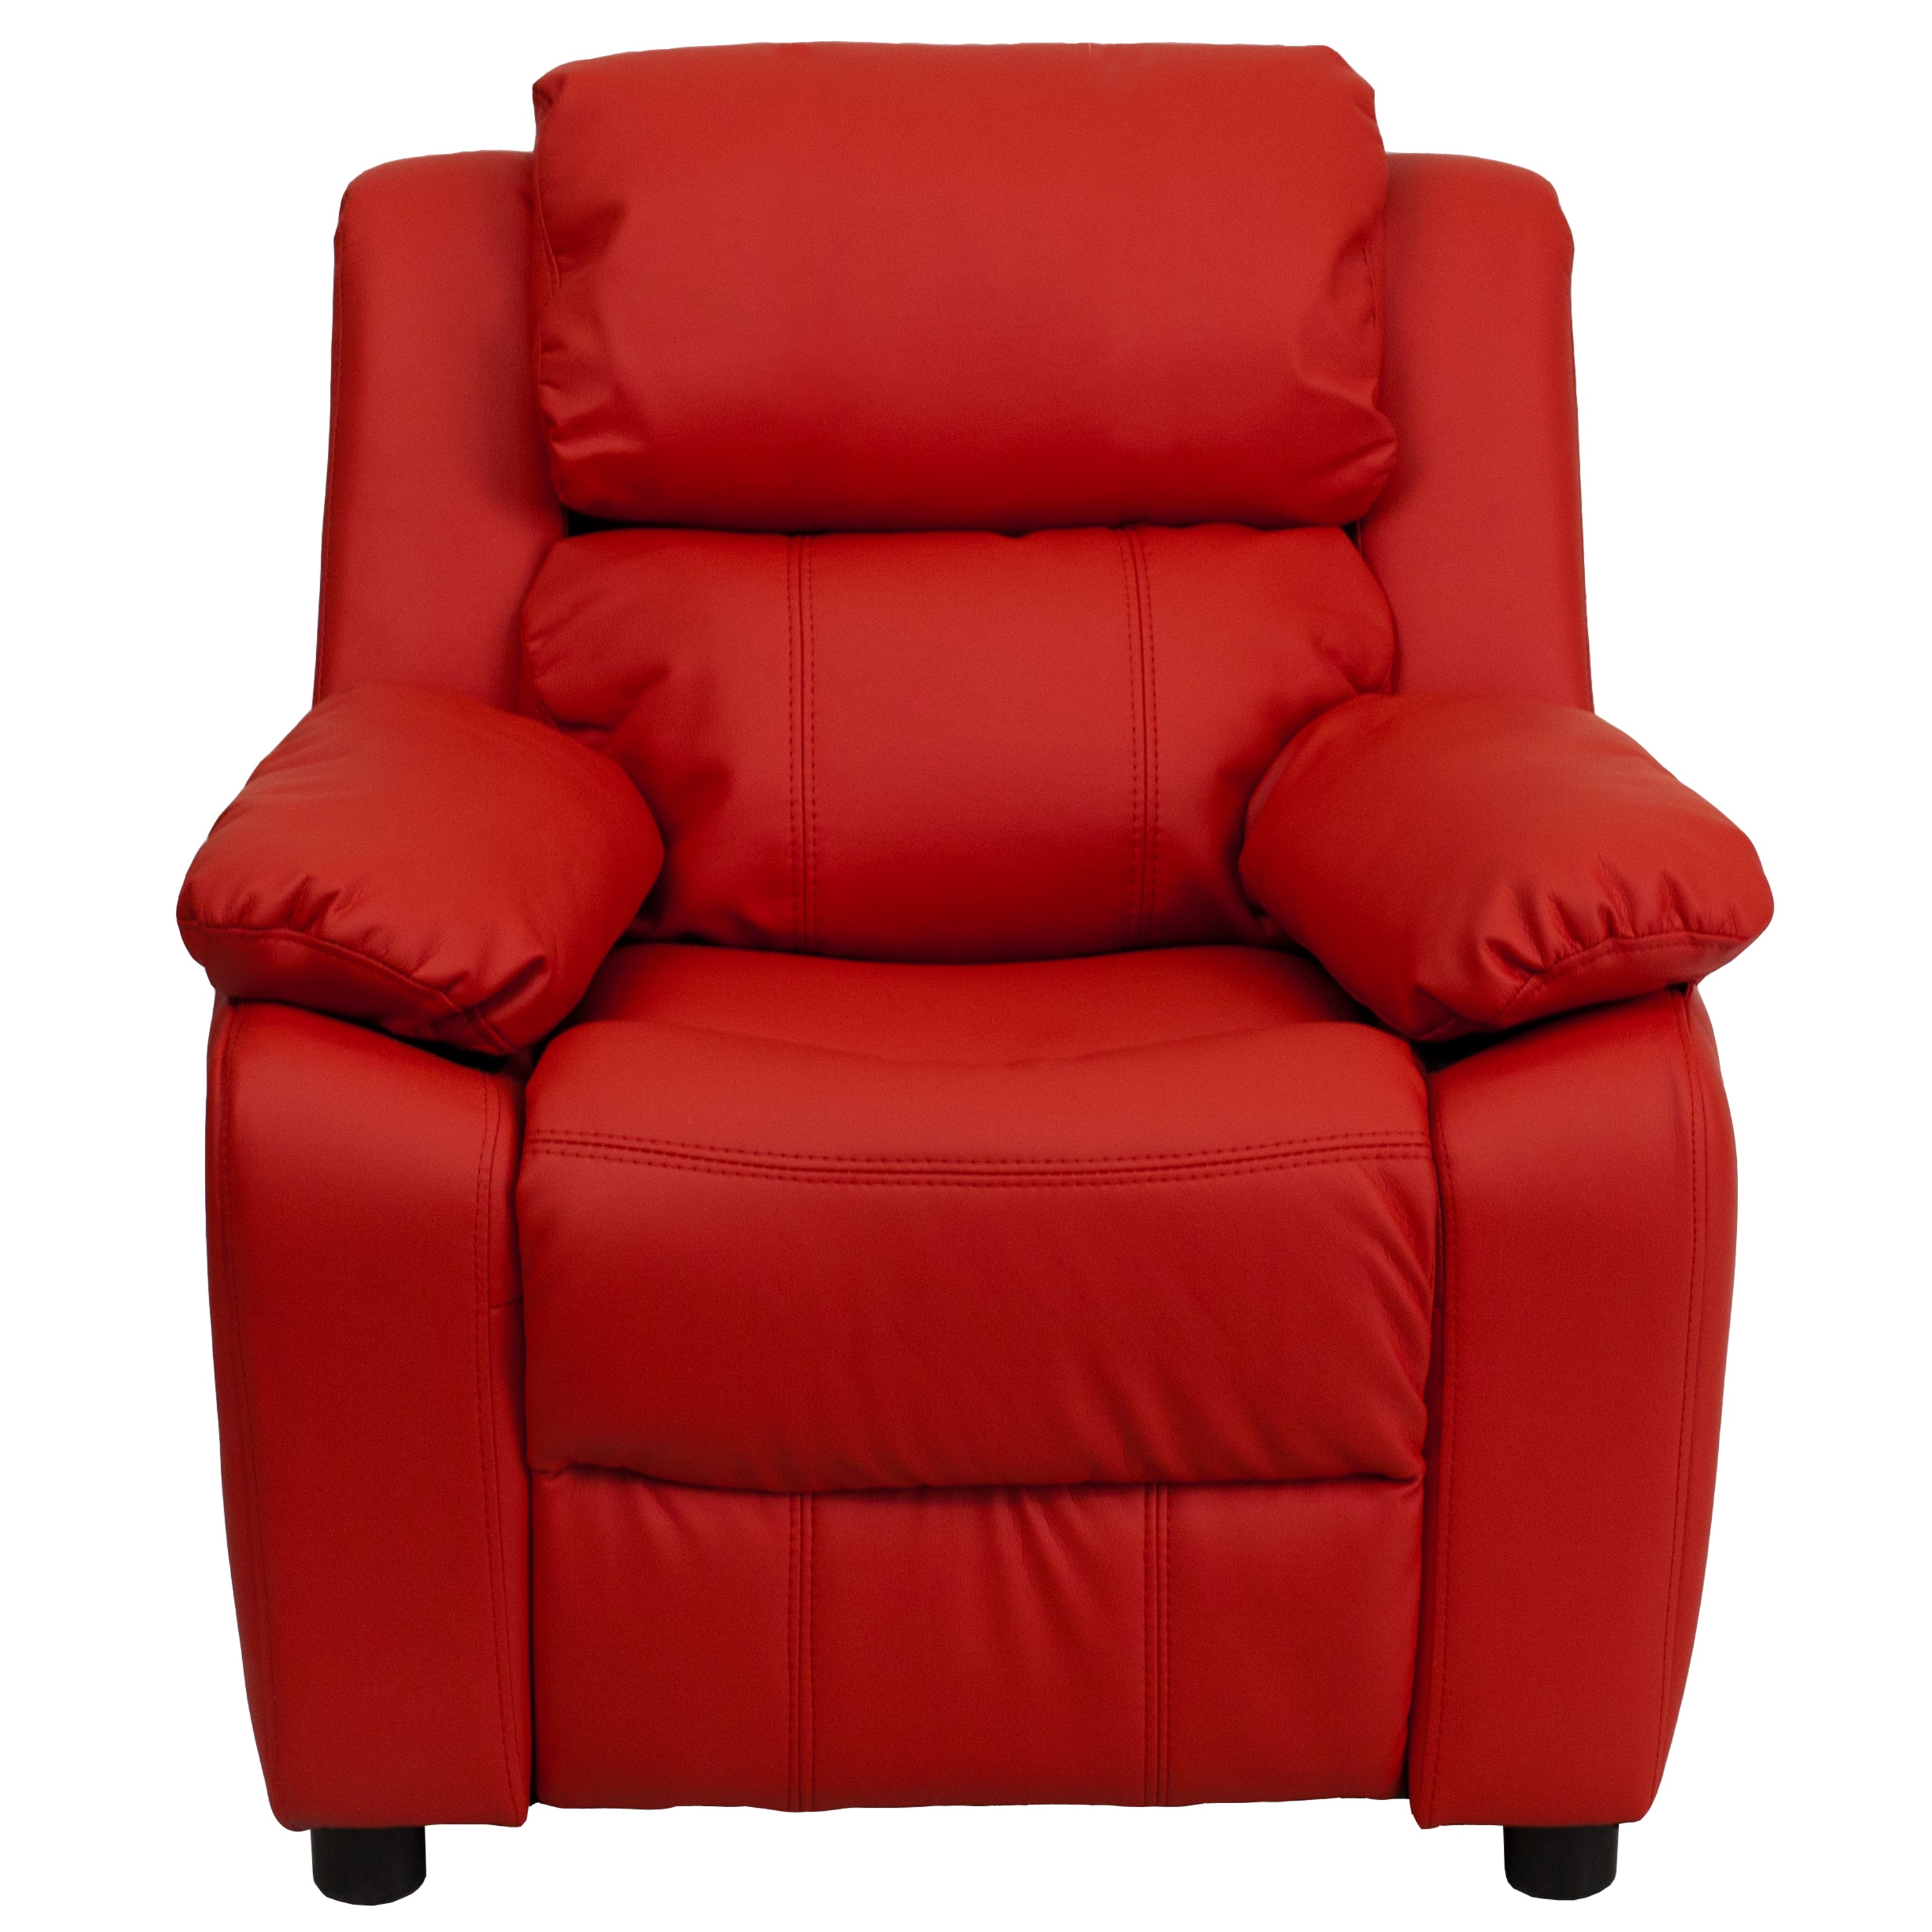 Deluxe Padded Contemporary Kids Recliner with Storage Arms-Kids Recliner-Flash Furniture-Wall2Wall Furnishings